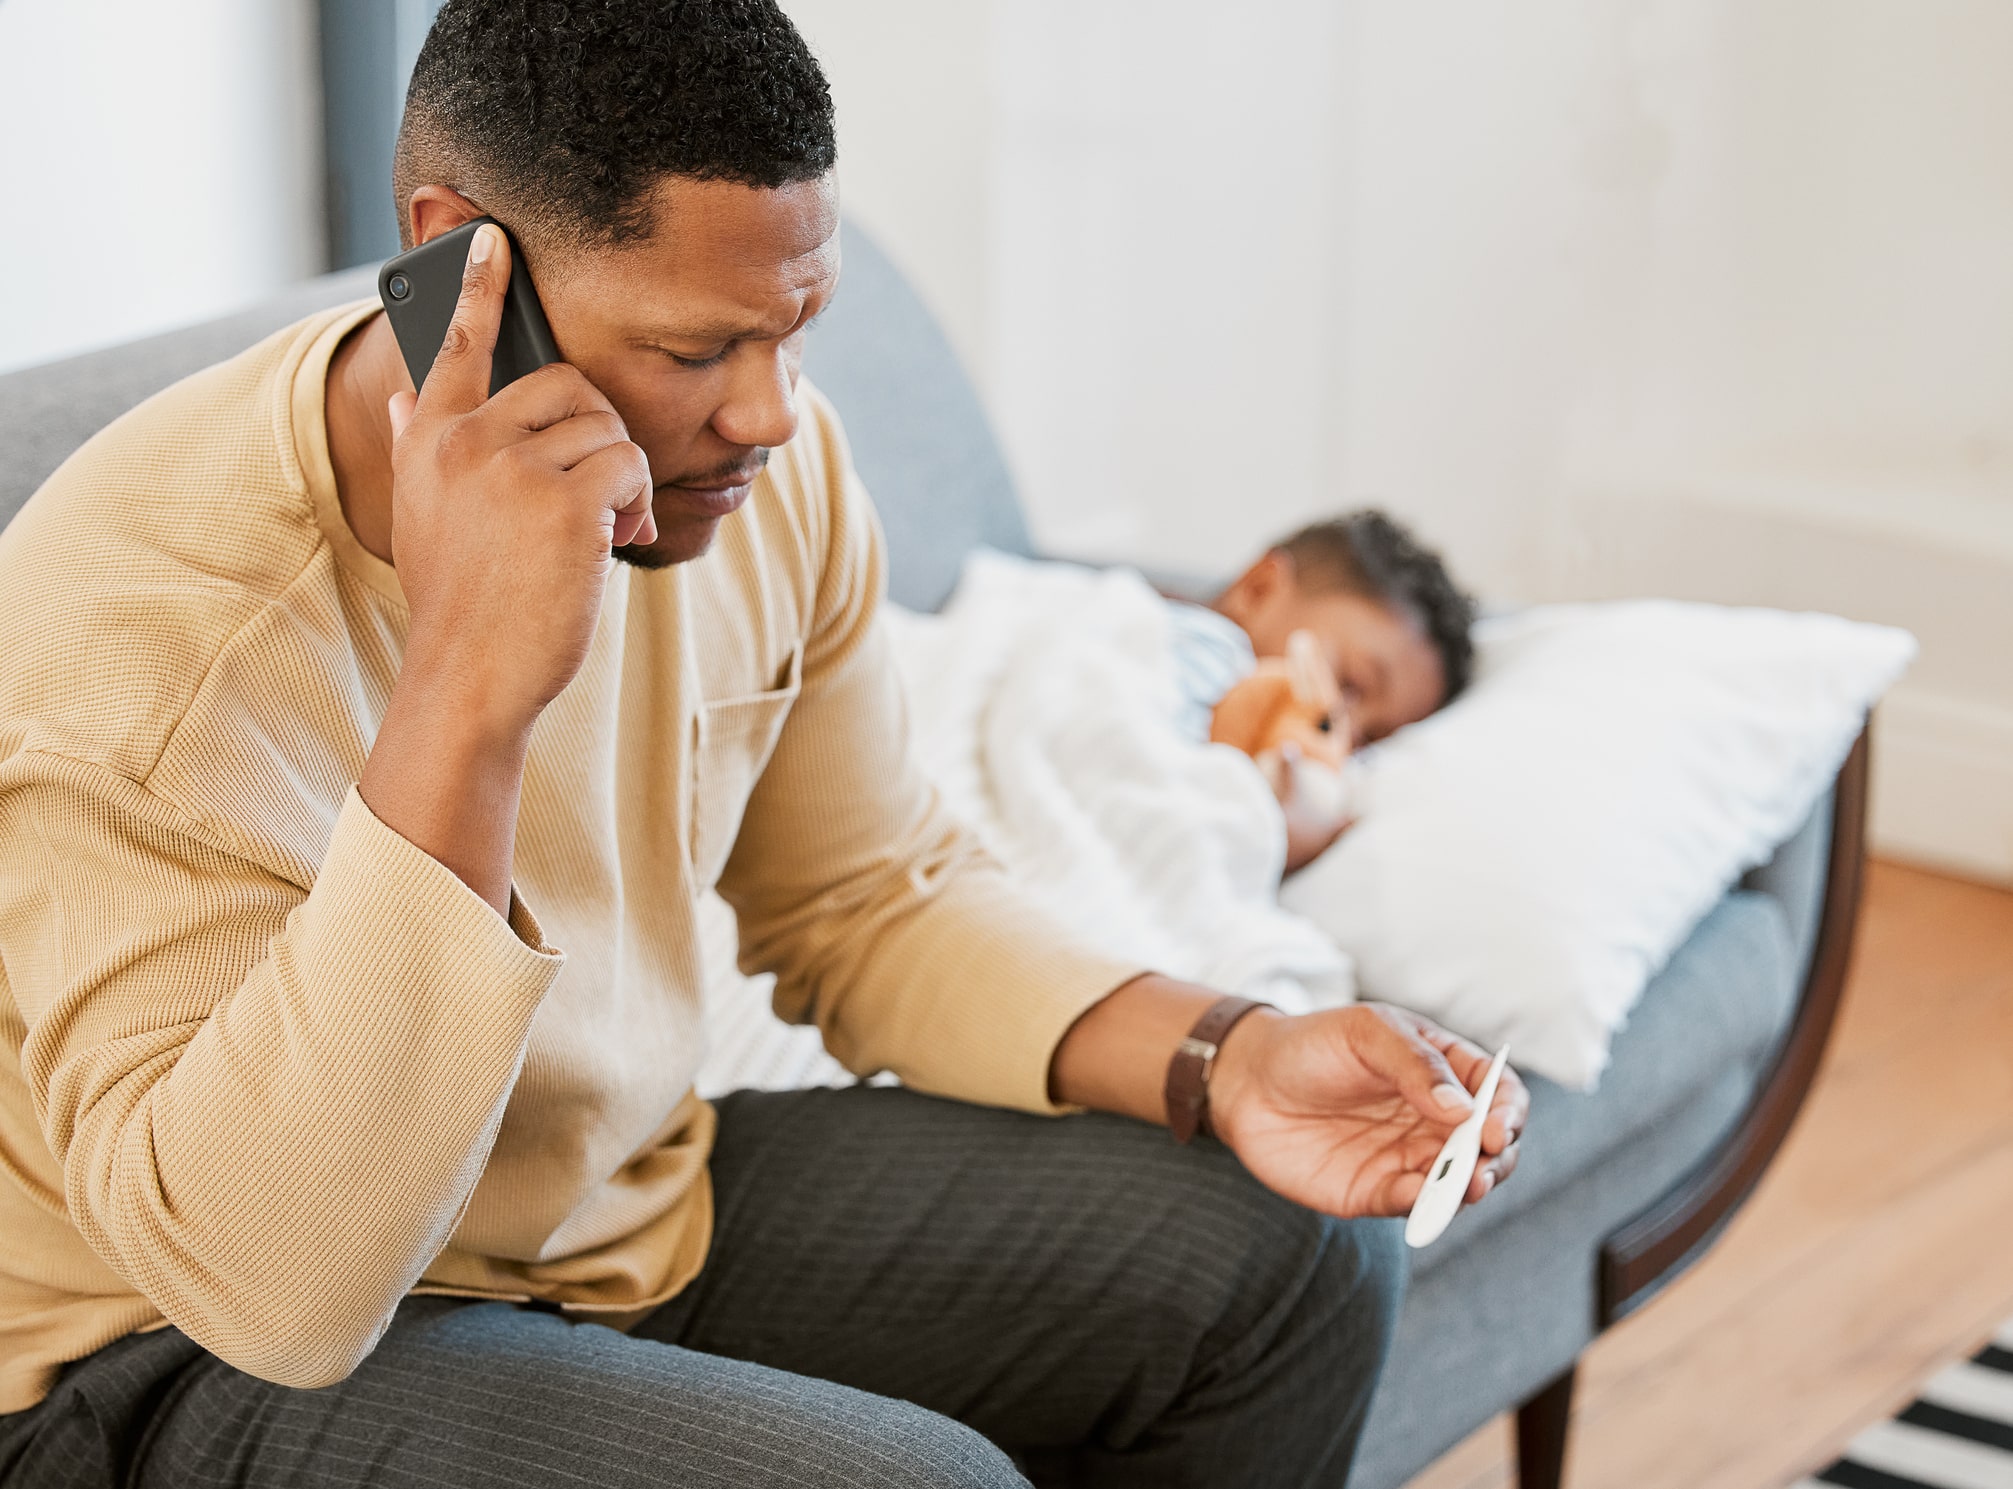 A parent sitting on a couch with their sick child at home calls pediatric telephone triage while checking their child's temperature.